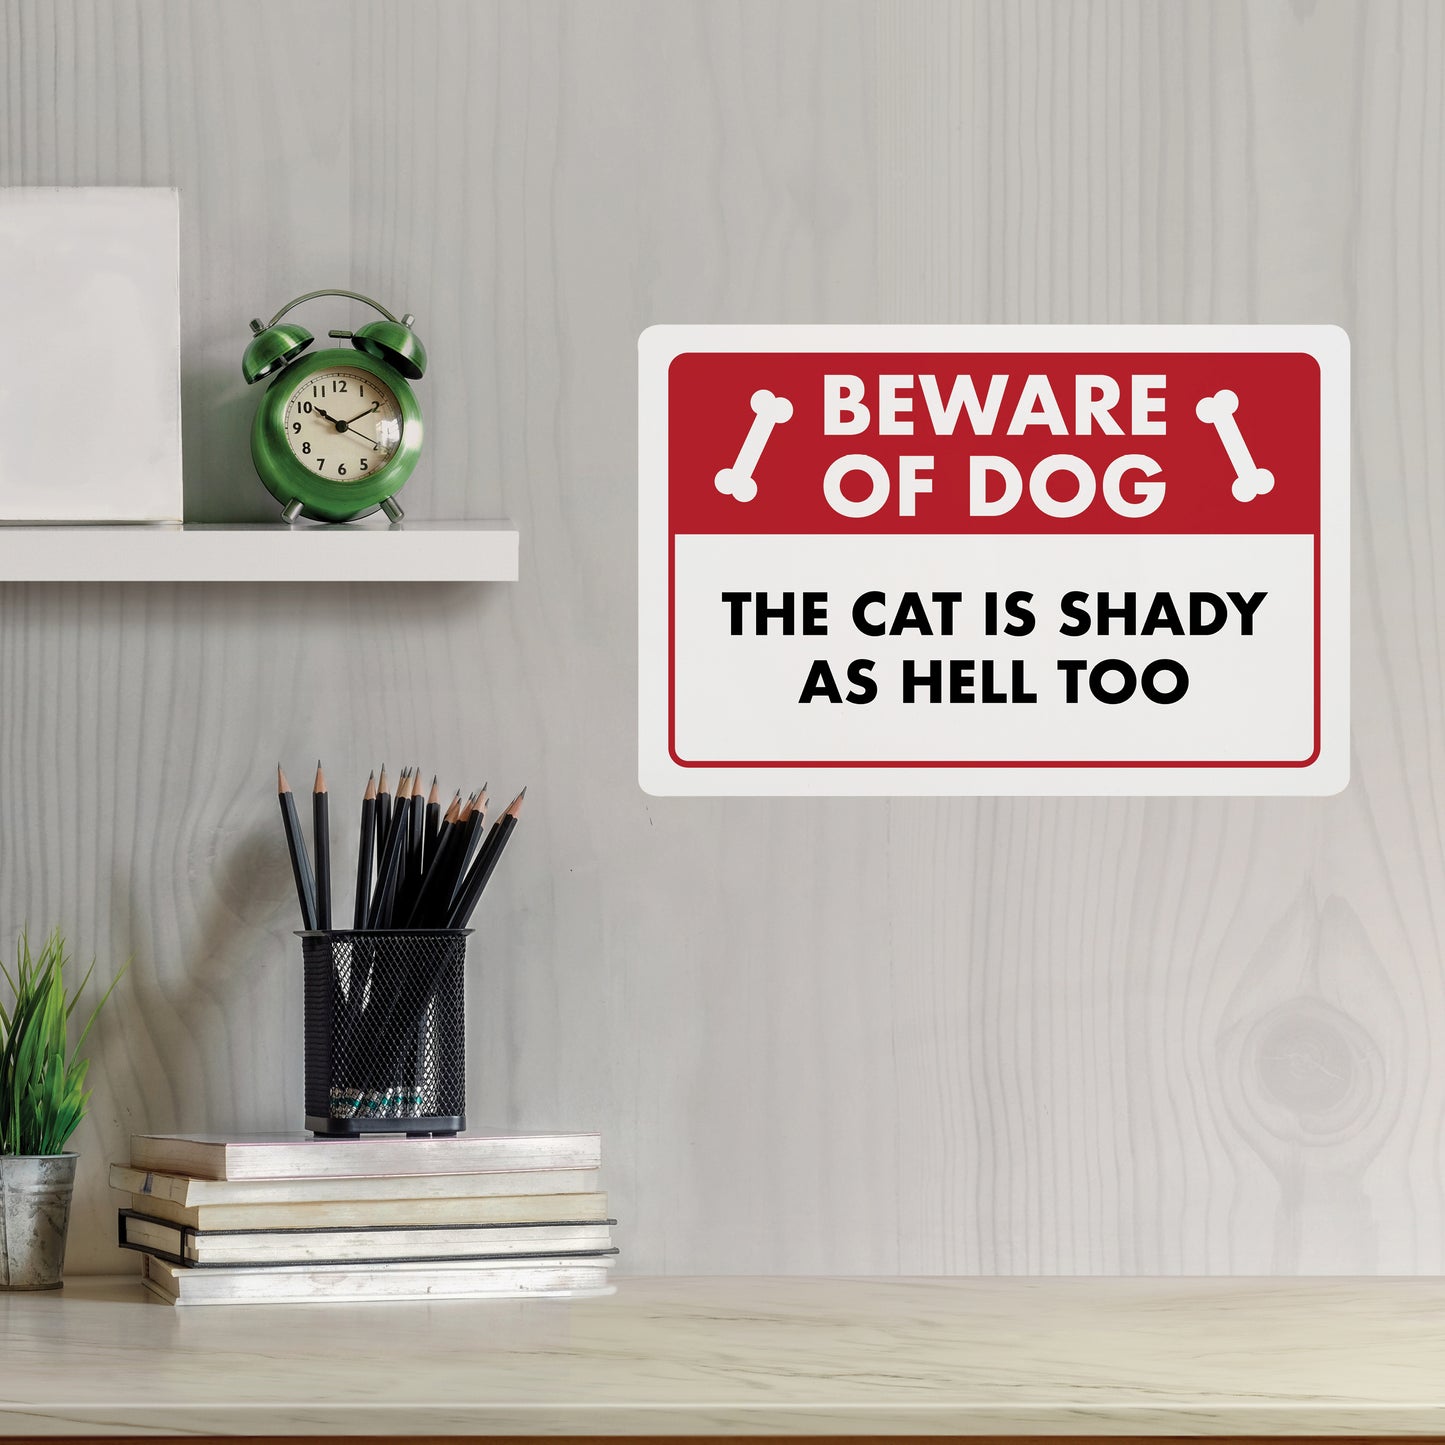 Beware of Dog - The Cat is Shady as Hell Too - 8" x 12" Funny Plastic (PVC) Sign